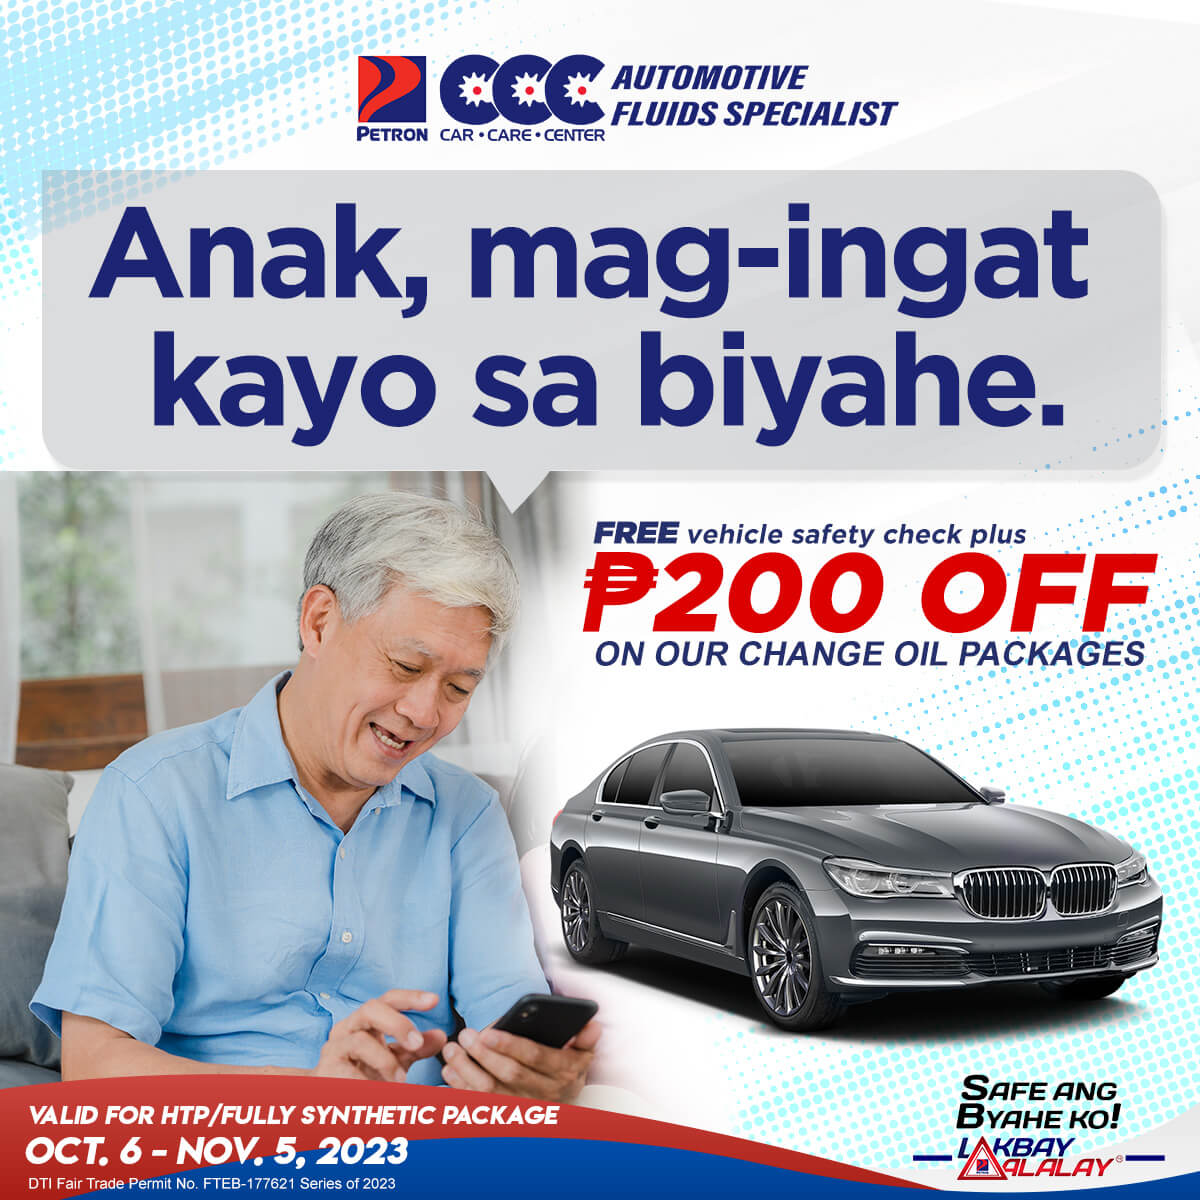 CCC Free Safety Check + Php200-off on HTP or Fully Synthetic Change Oil Package (October 6 – November 5, 2023)